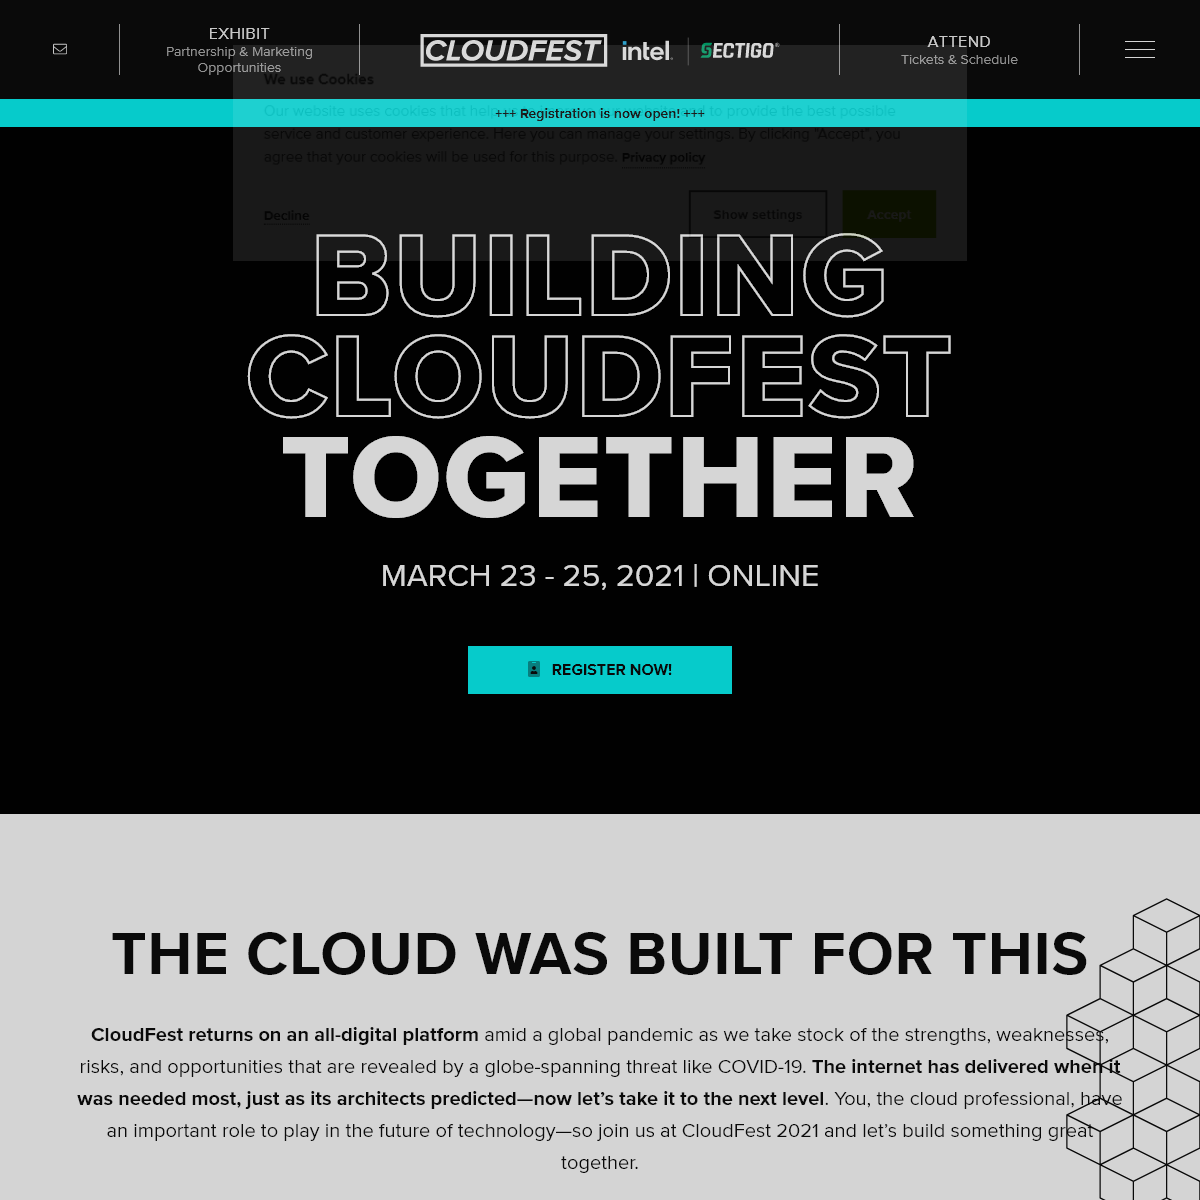 A complete backup of cloudfest.com